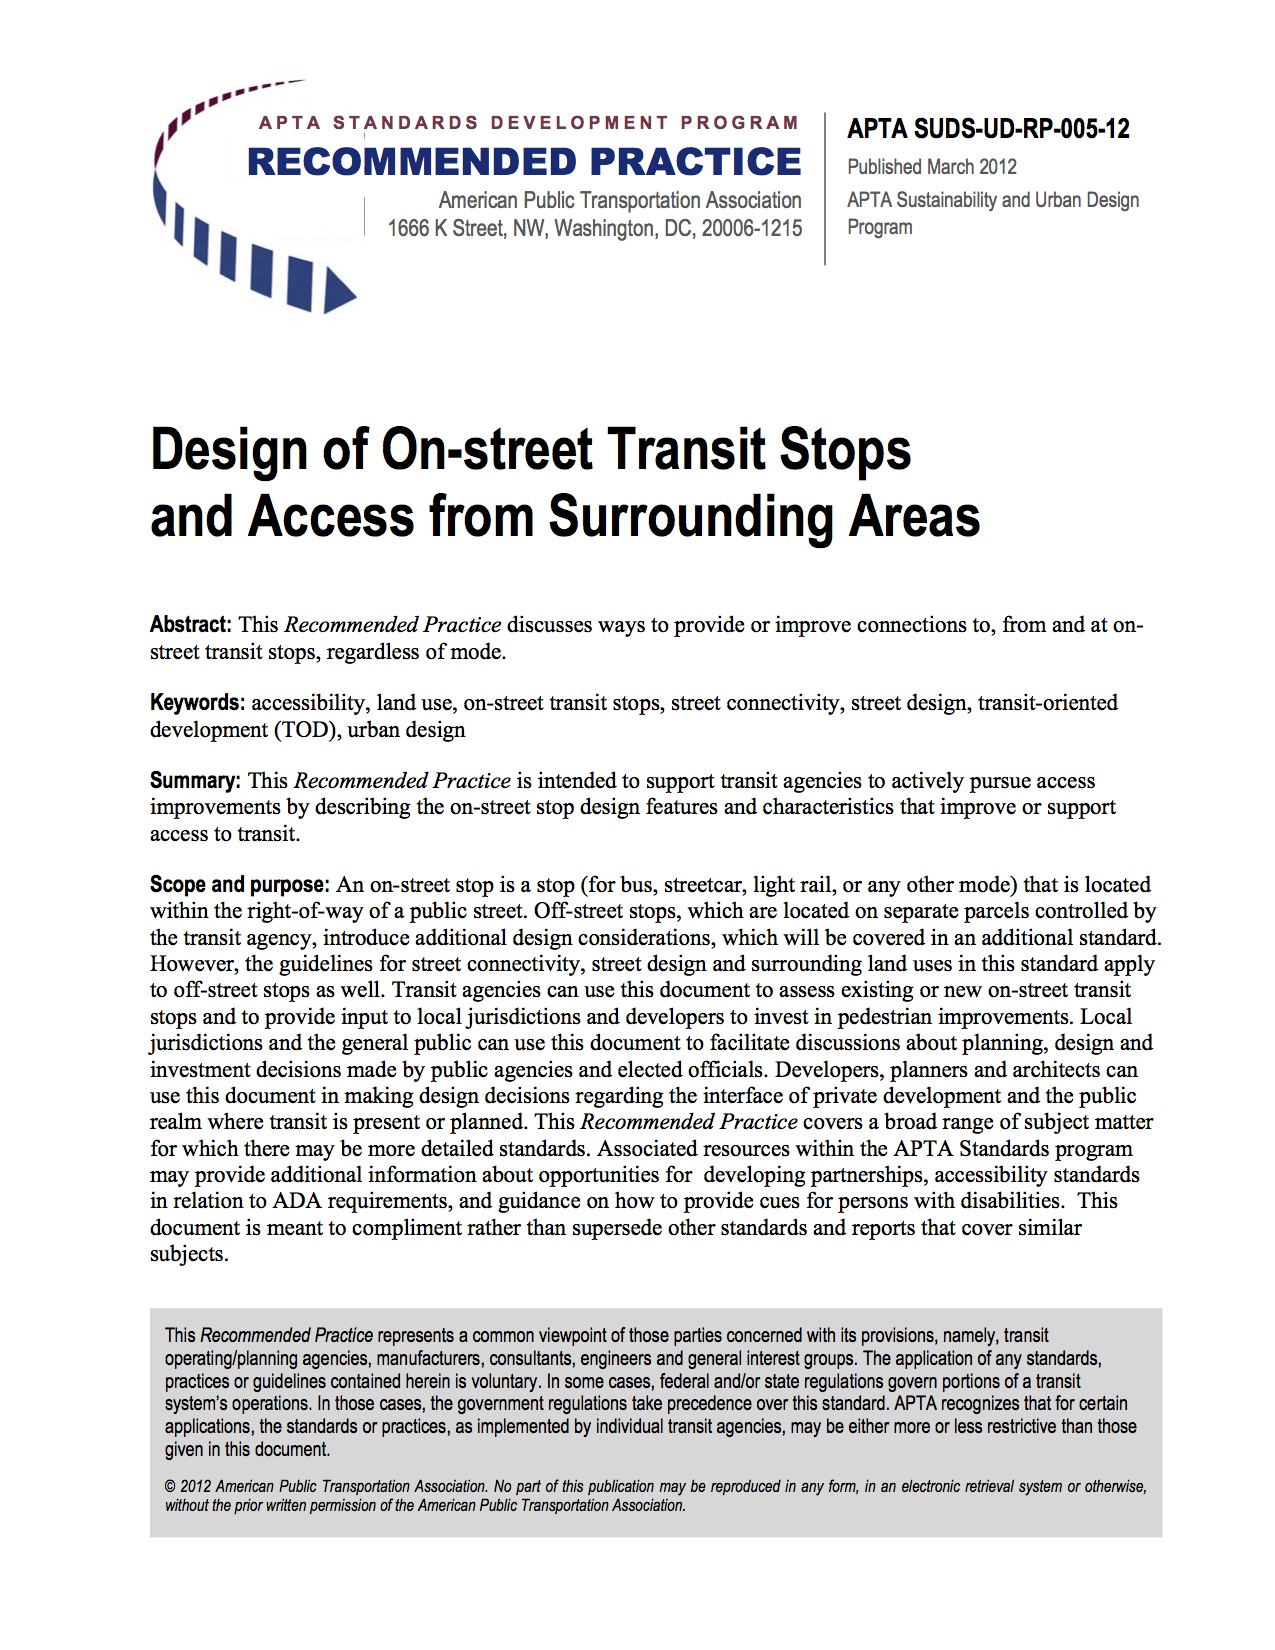 Design of On-street Transit Stops and Access from Surrounding Areas